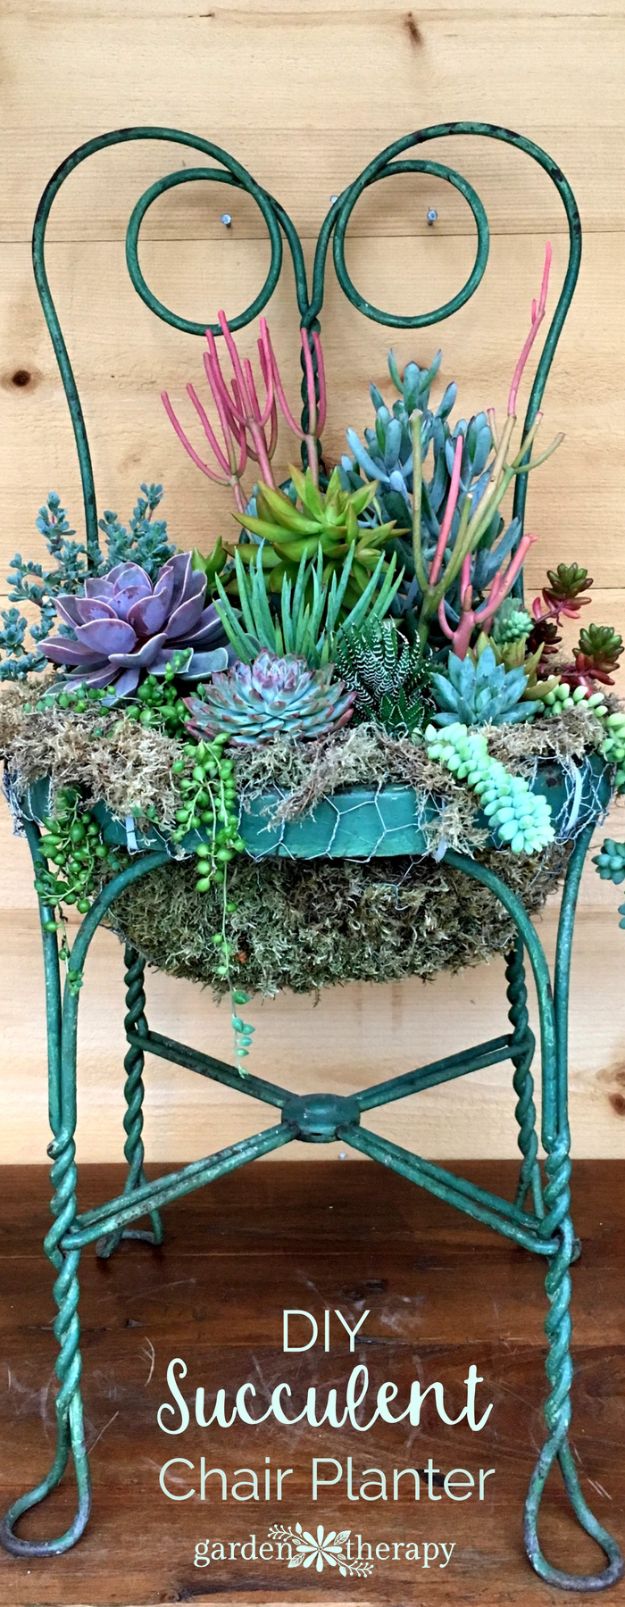 Container Gardening Ideas - Succulent Chair Planter - Easy Garden Projects for Containers and Growing Plants in Small Spaces - DIY Potting Tips and Planter Boxes for Vegetables, Herbs and Flowers - Simple Ideas for Beginners -Shade, Full Sun, Pation and Yard Landscape Idea tutorials 